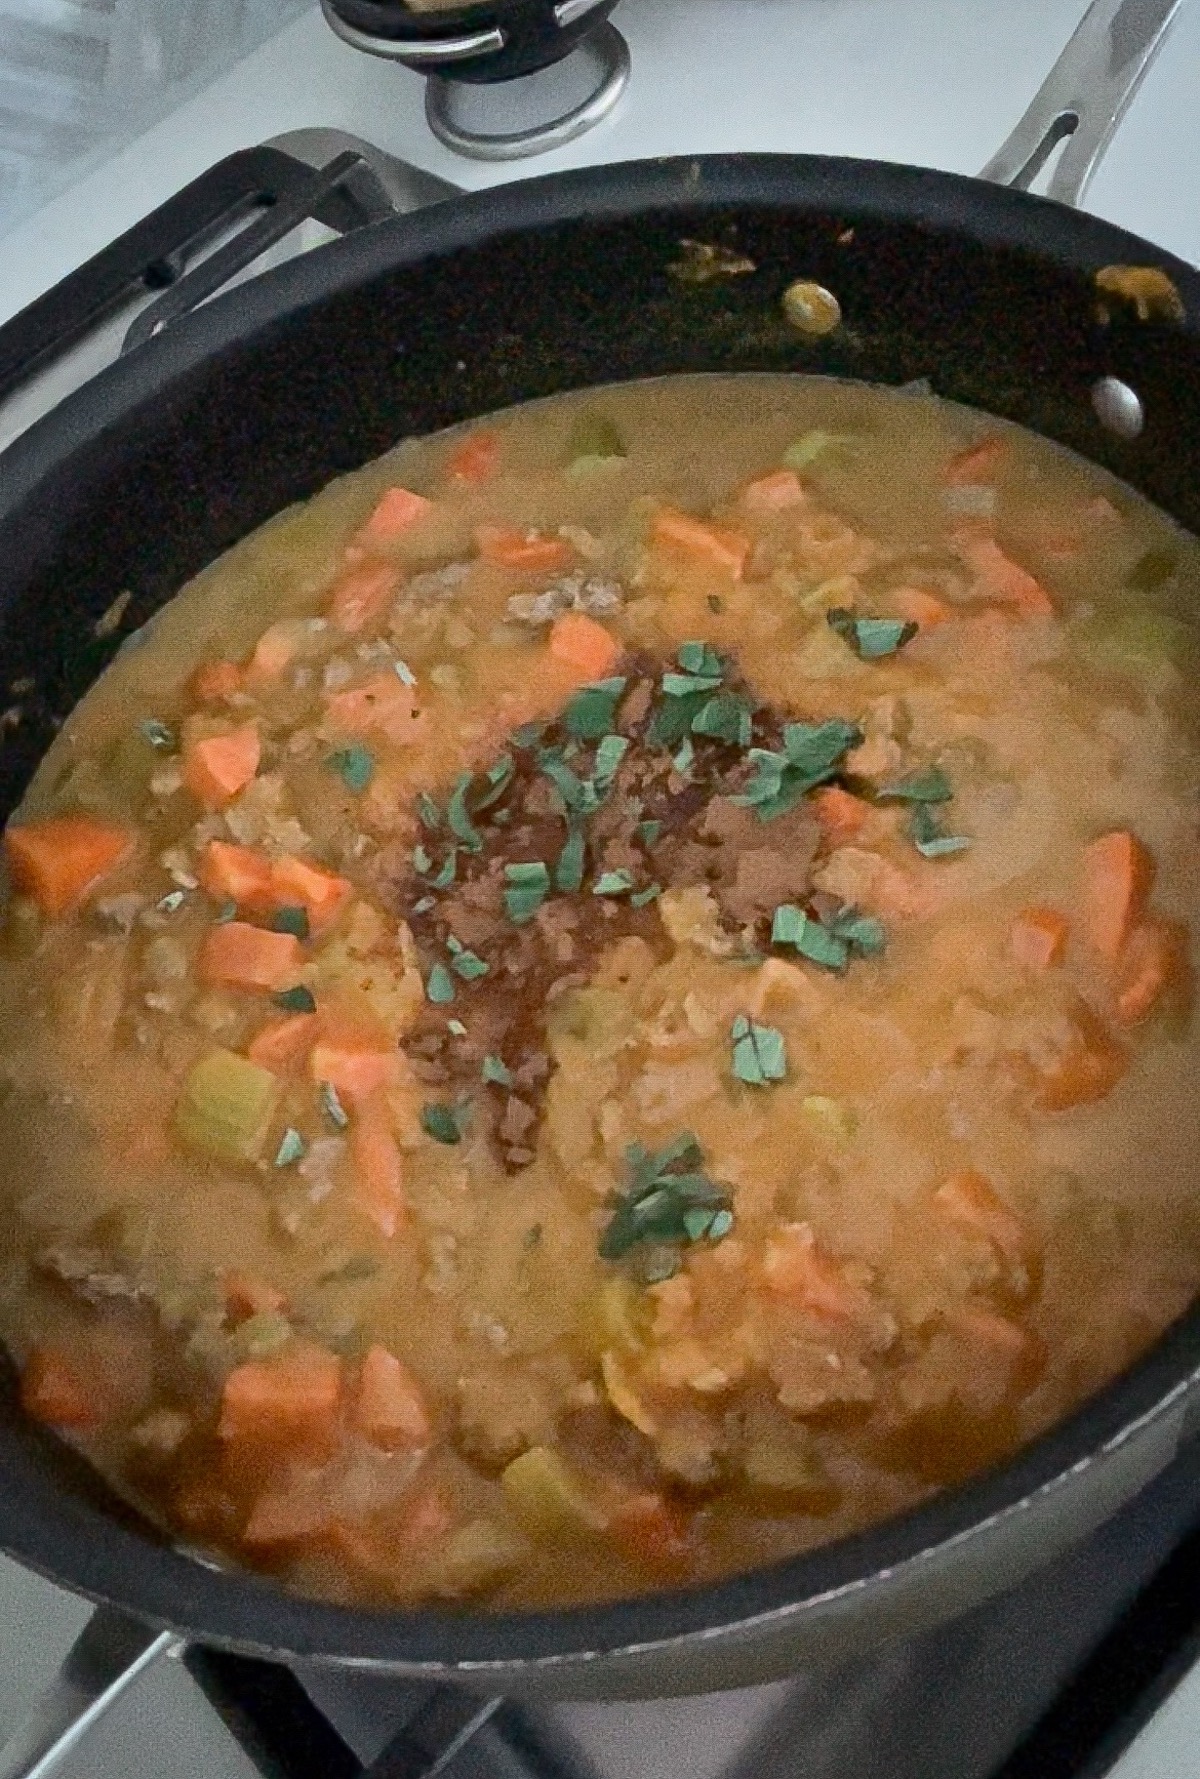 bolognese sauce simmering in a skillet